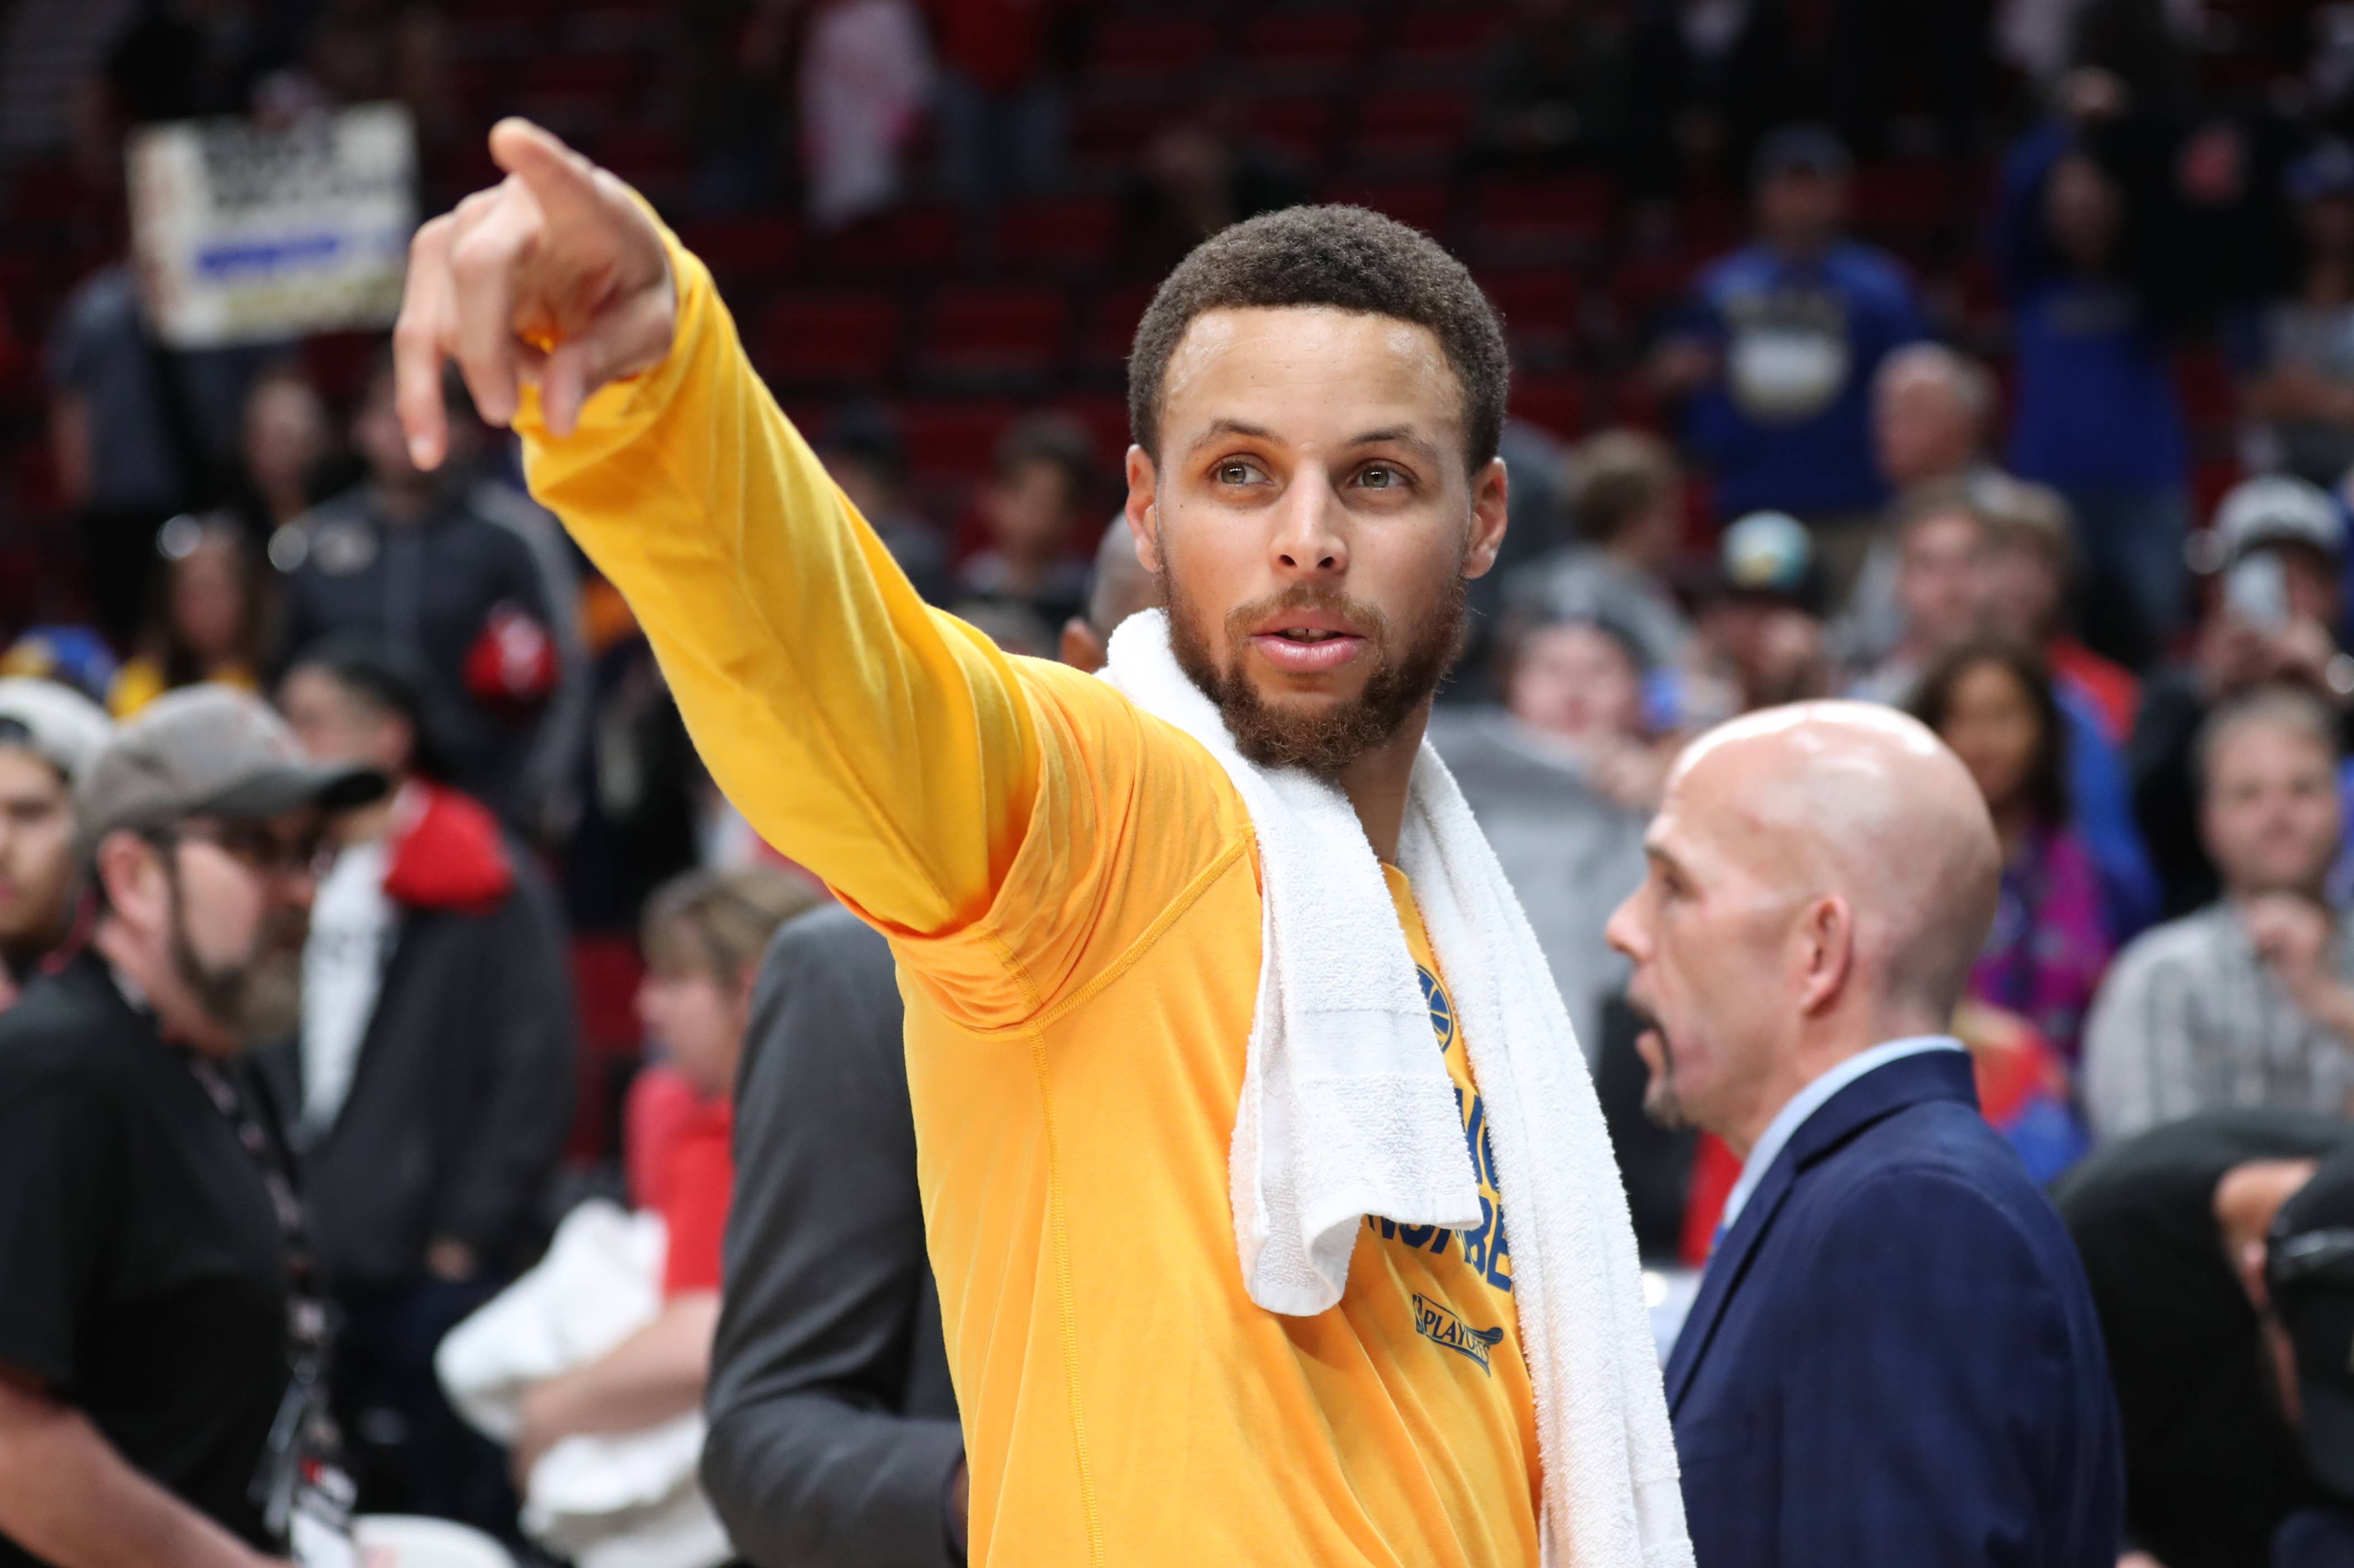 4 Untouchable Golden State Warriors not named Stephen Curry